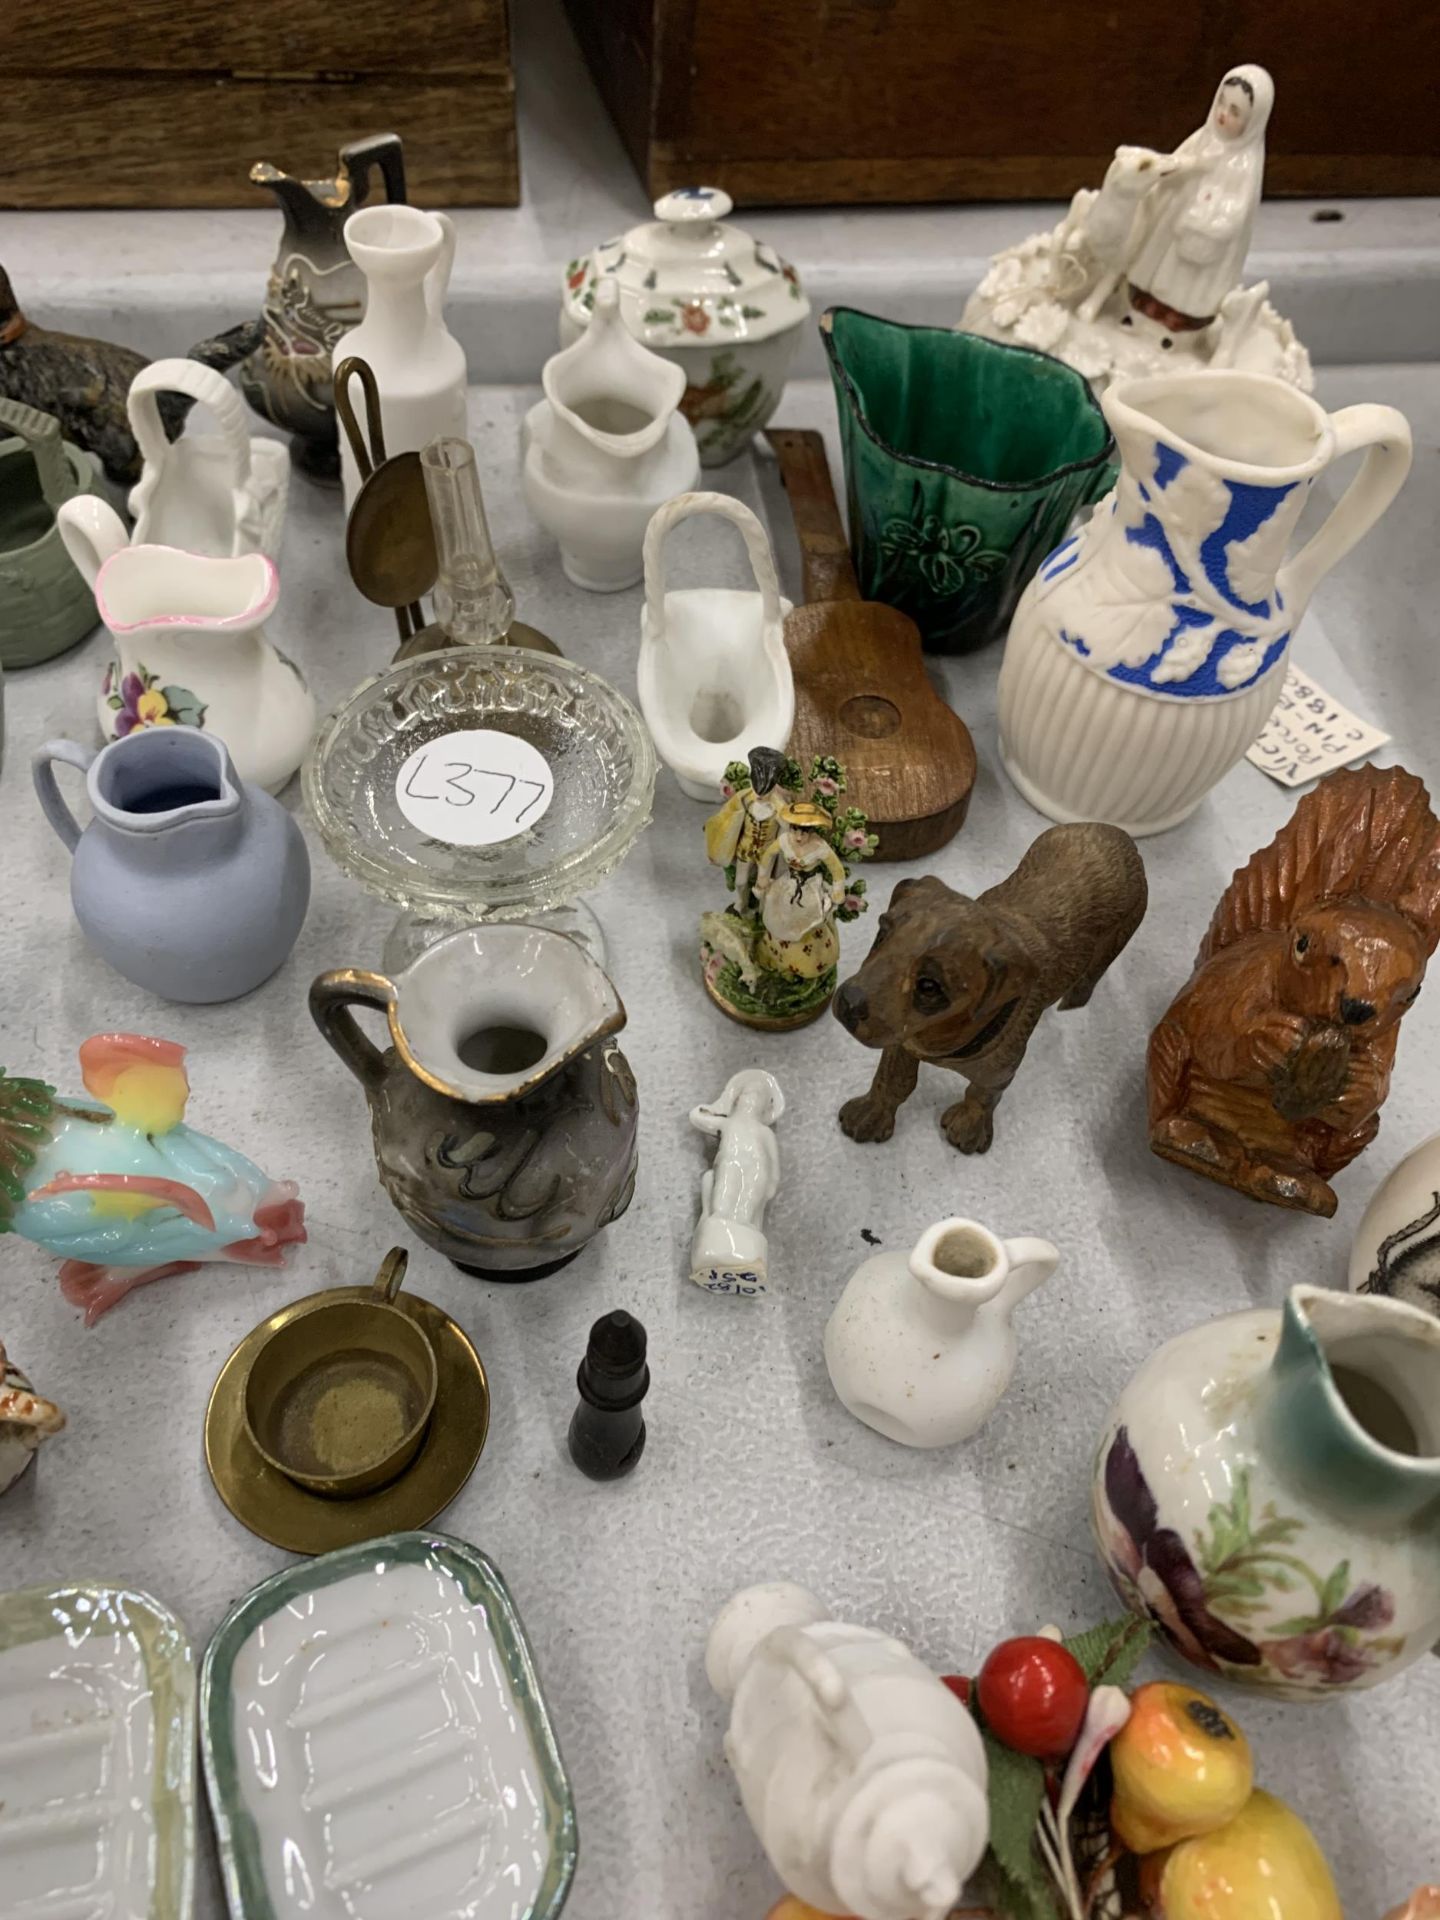 A LARGE QUANTITY OF MINIATURE ITEMS TO INCLUDE JUGS, POTS, ANIMALS, PLATES, ETC - Image 4 of 4